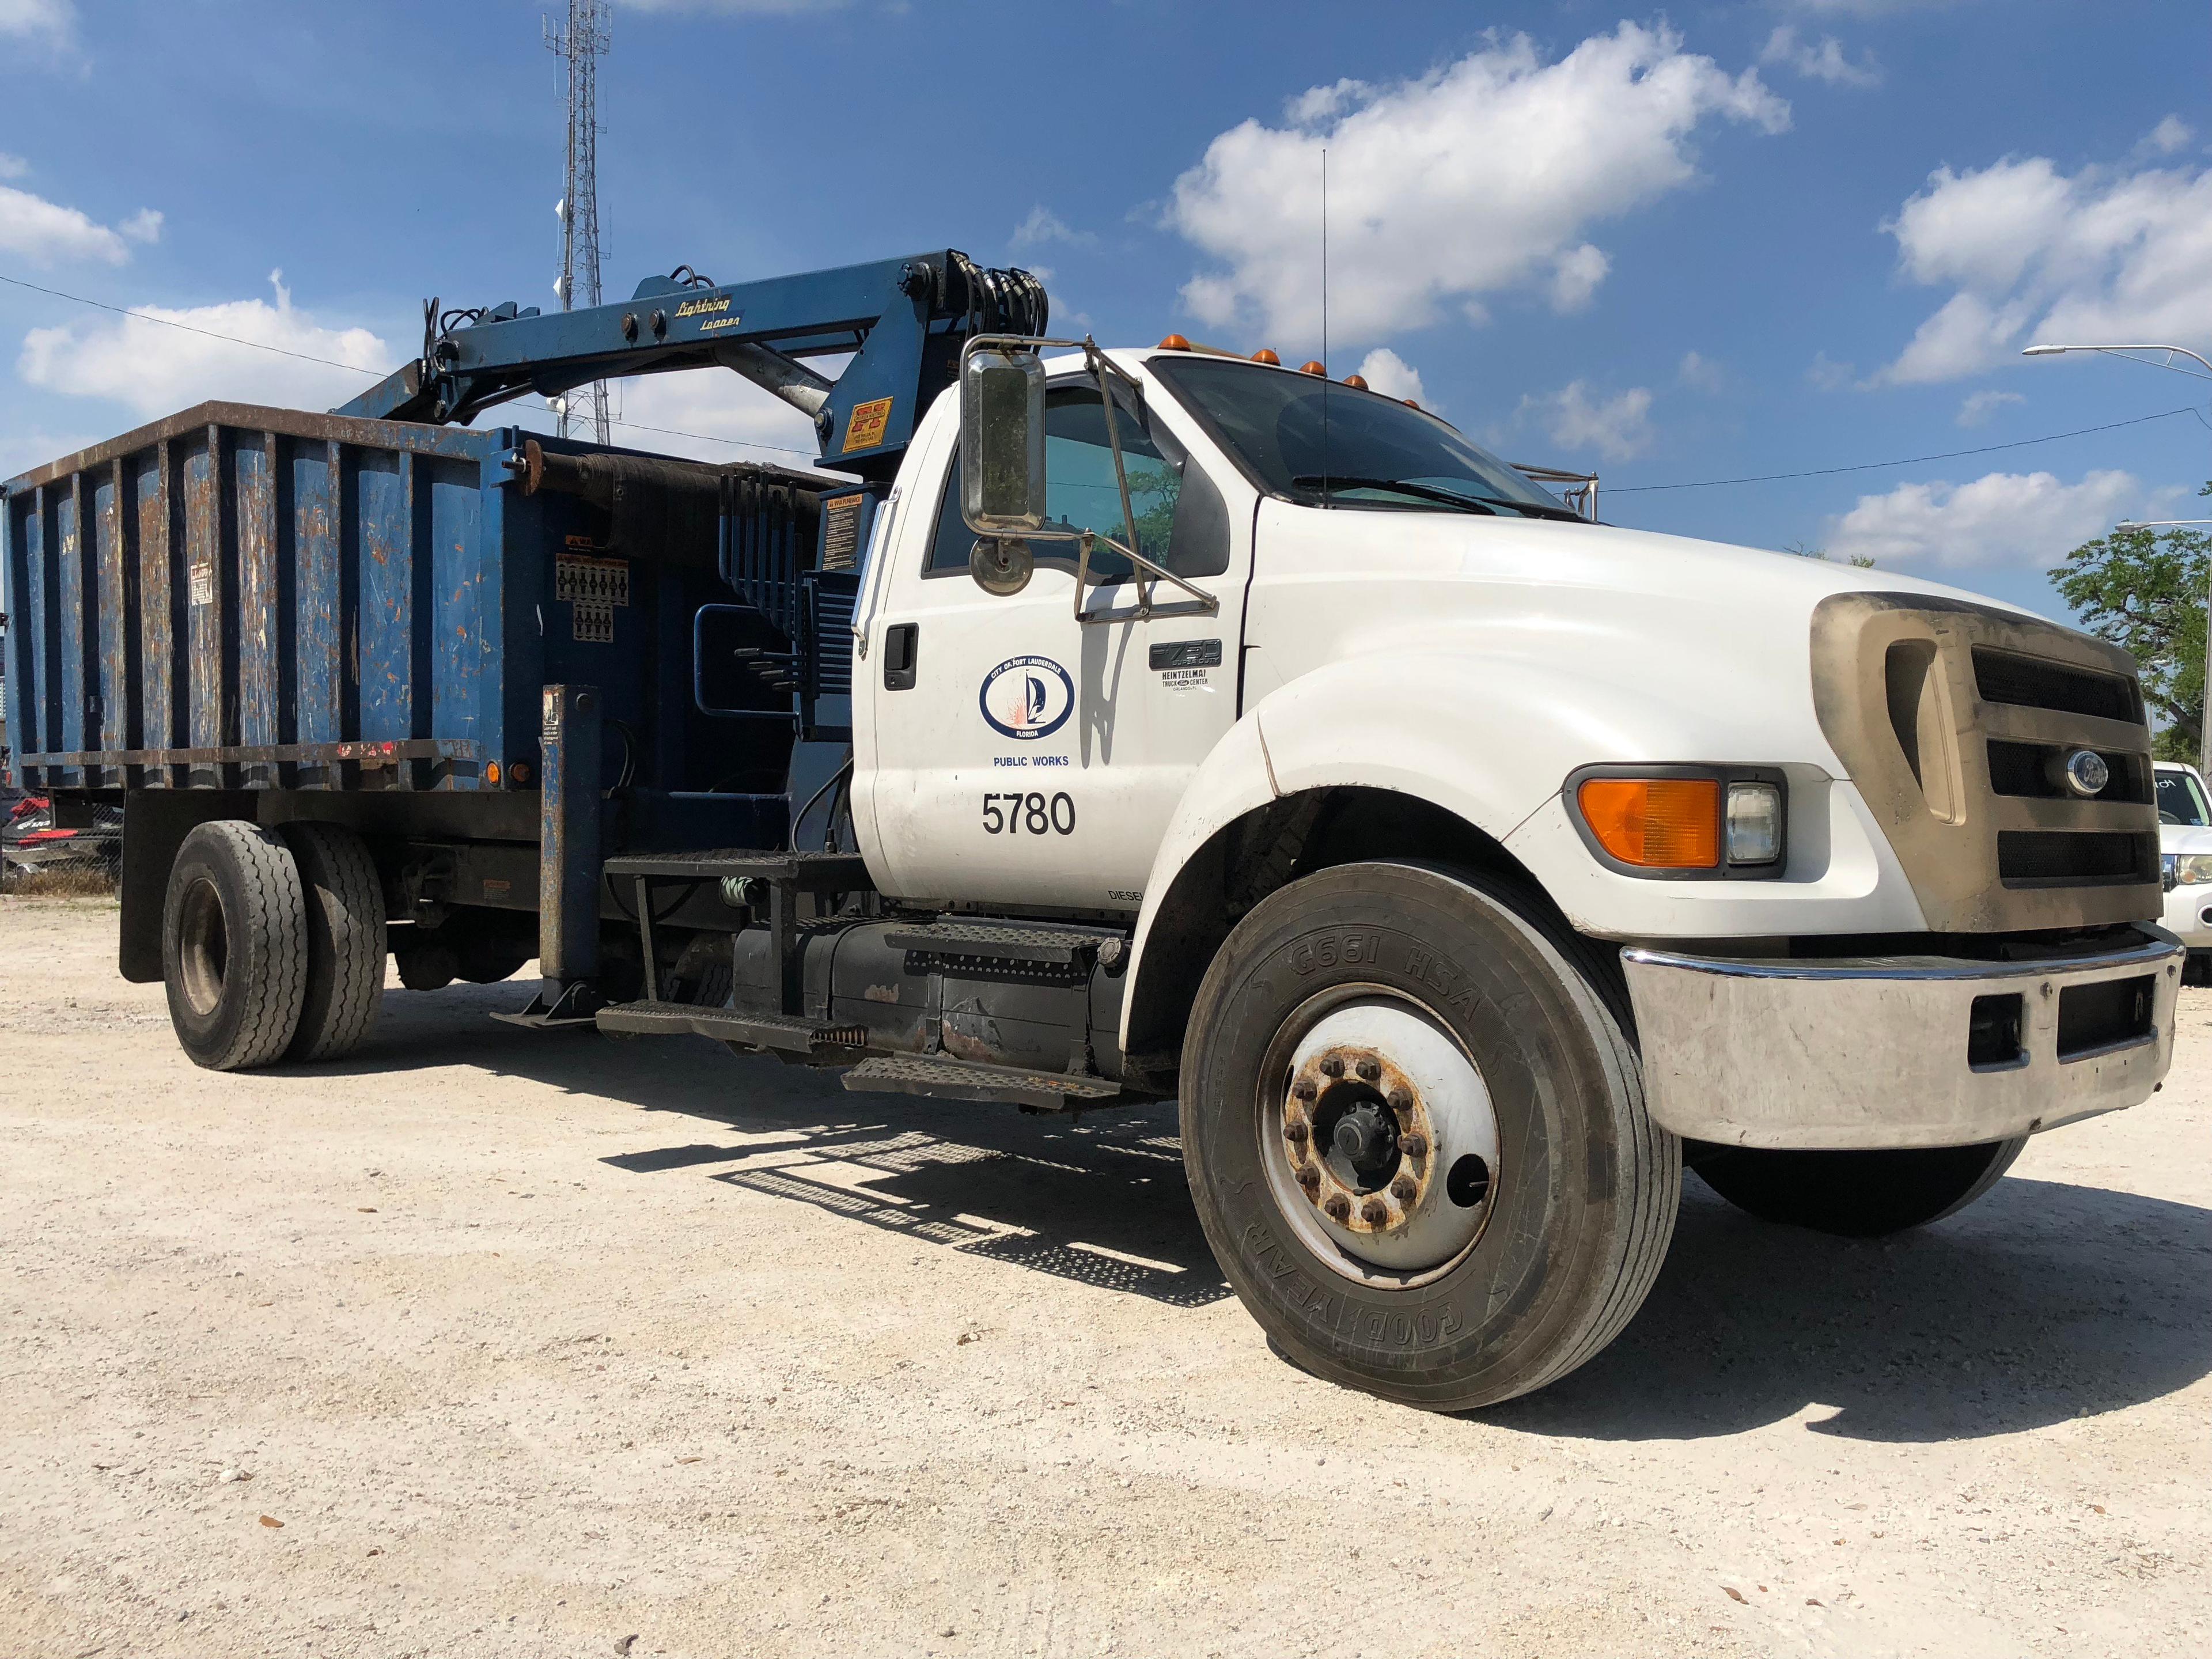 2007 Ford F-650 Grapple Truck